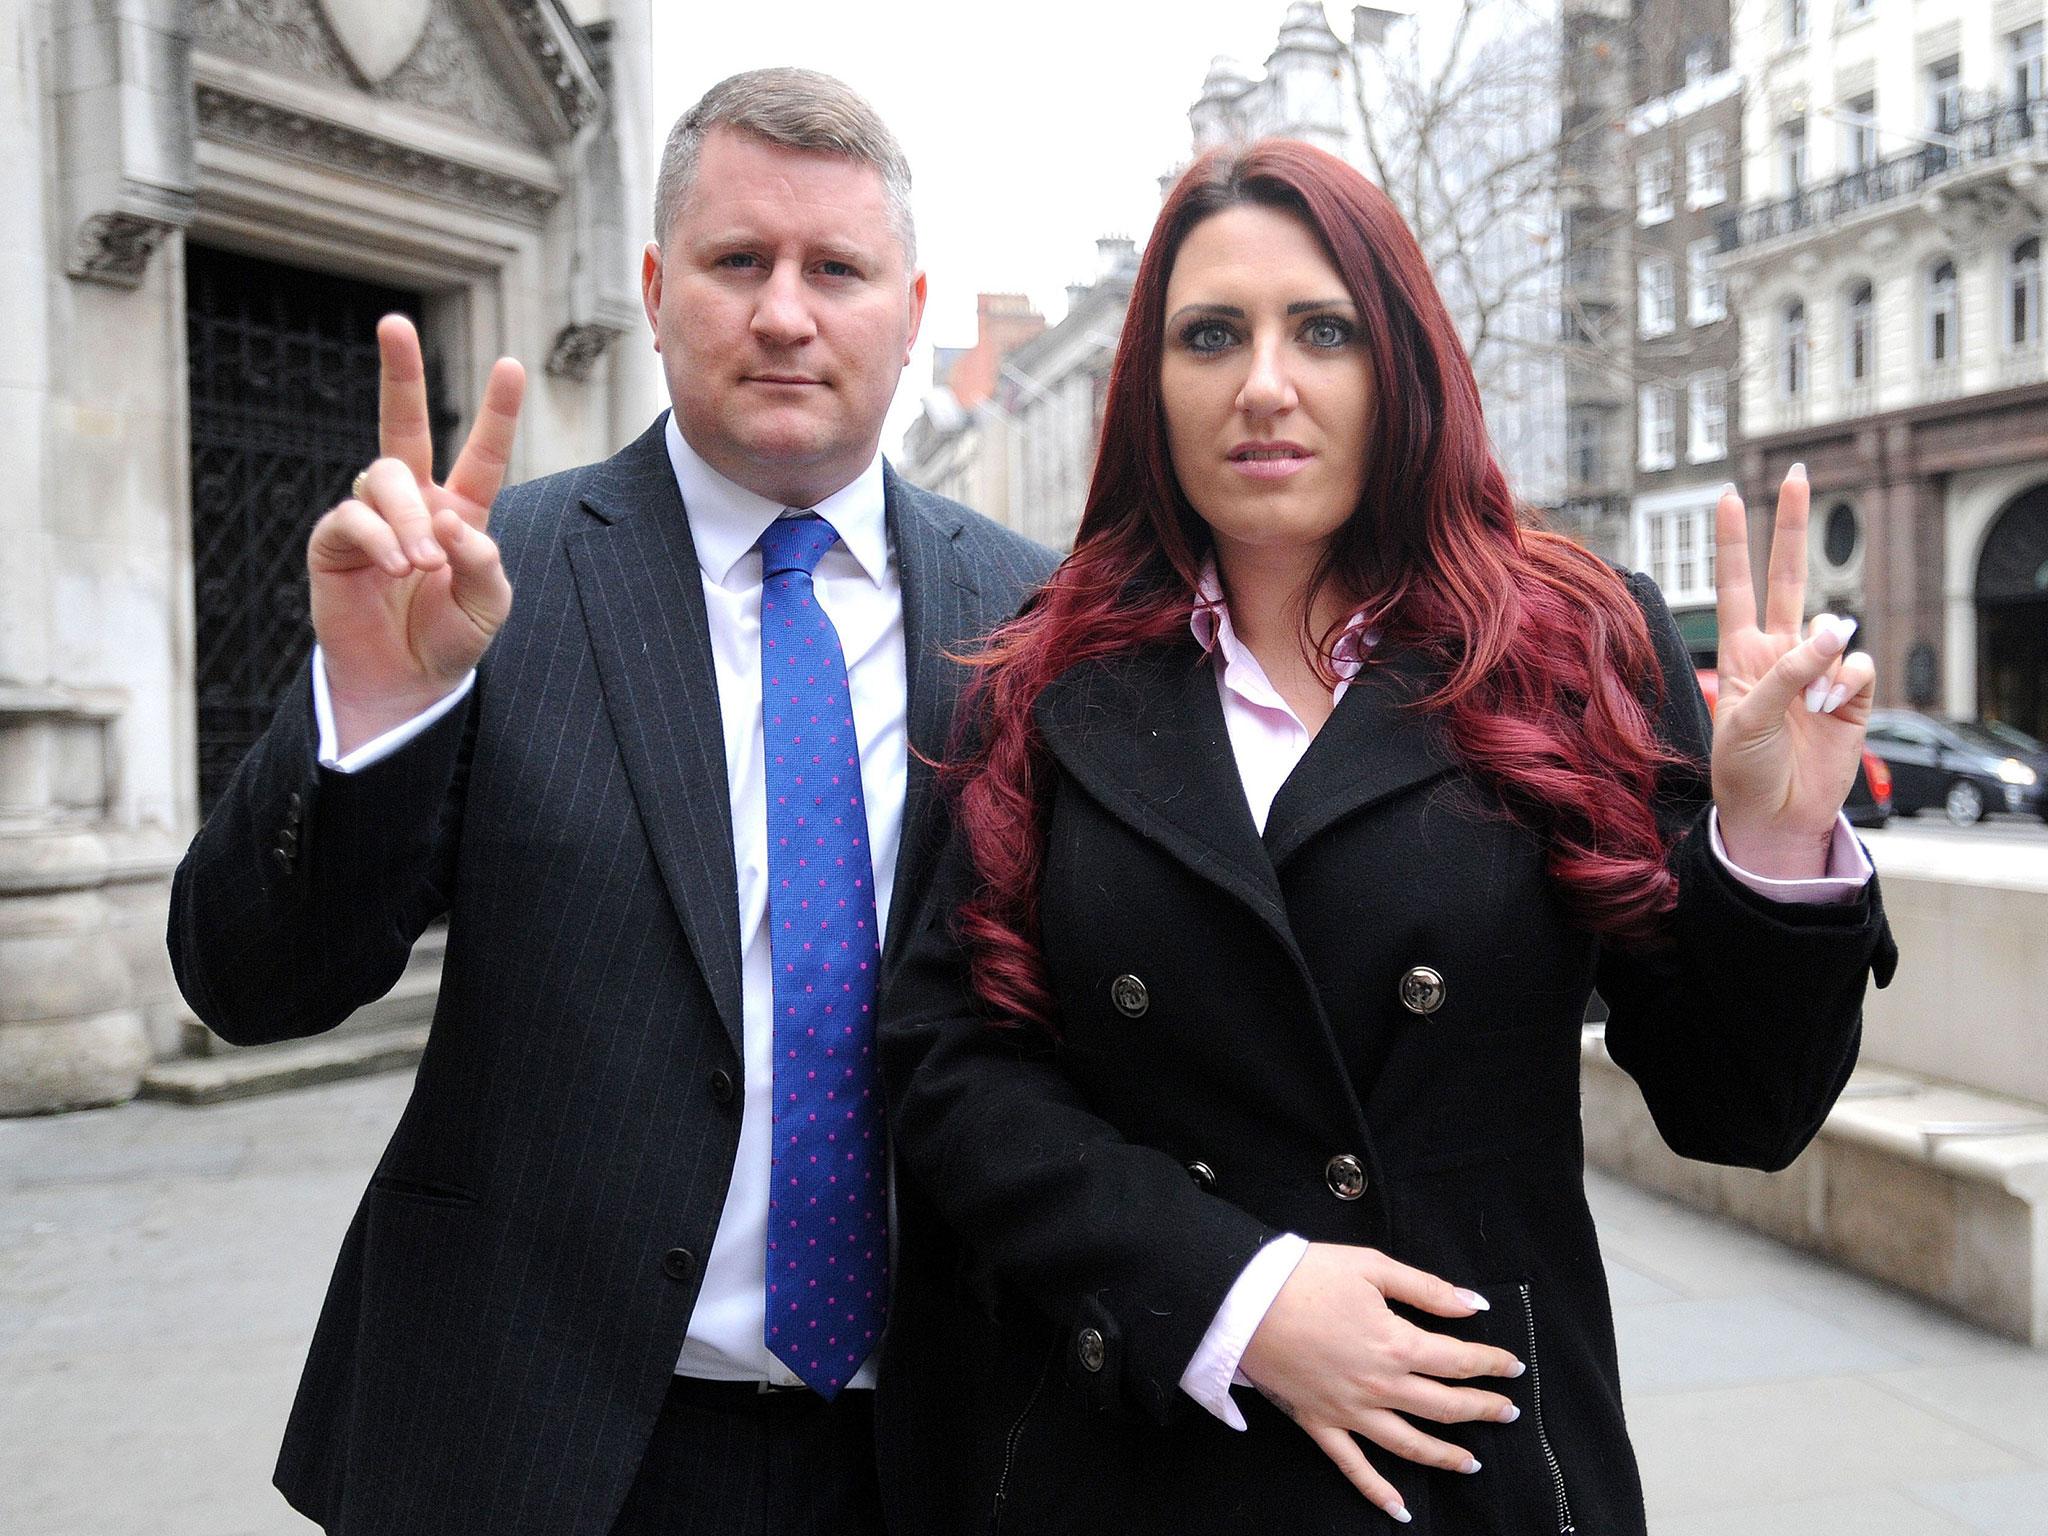 Paul Golding and Jayda Fransen, the leader and deputy leader of Britain First